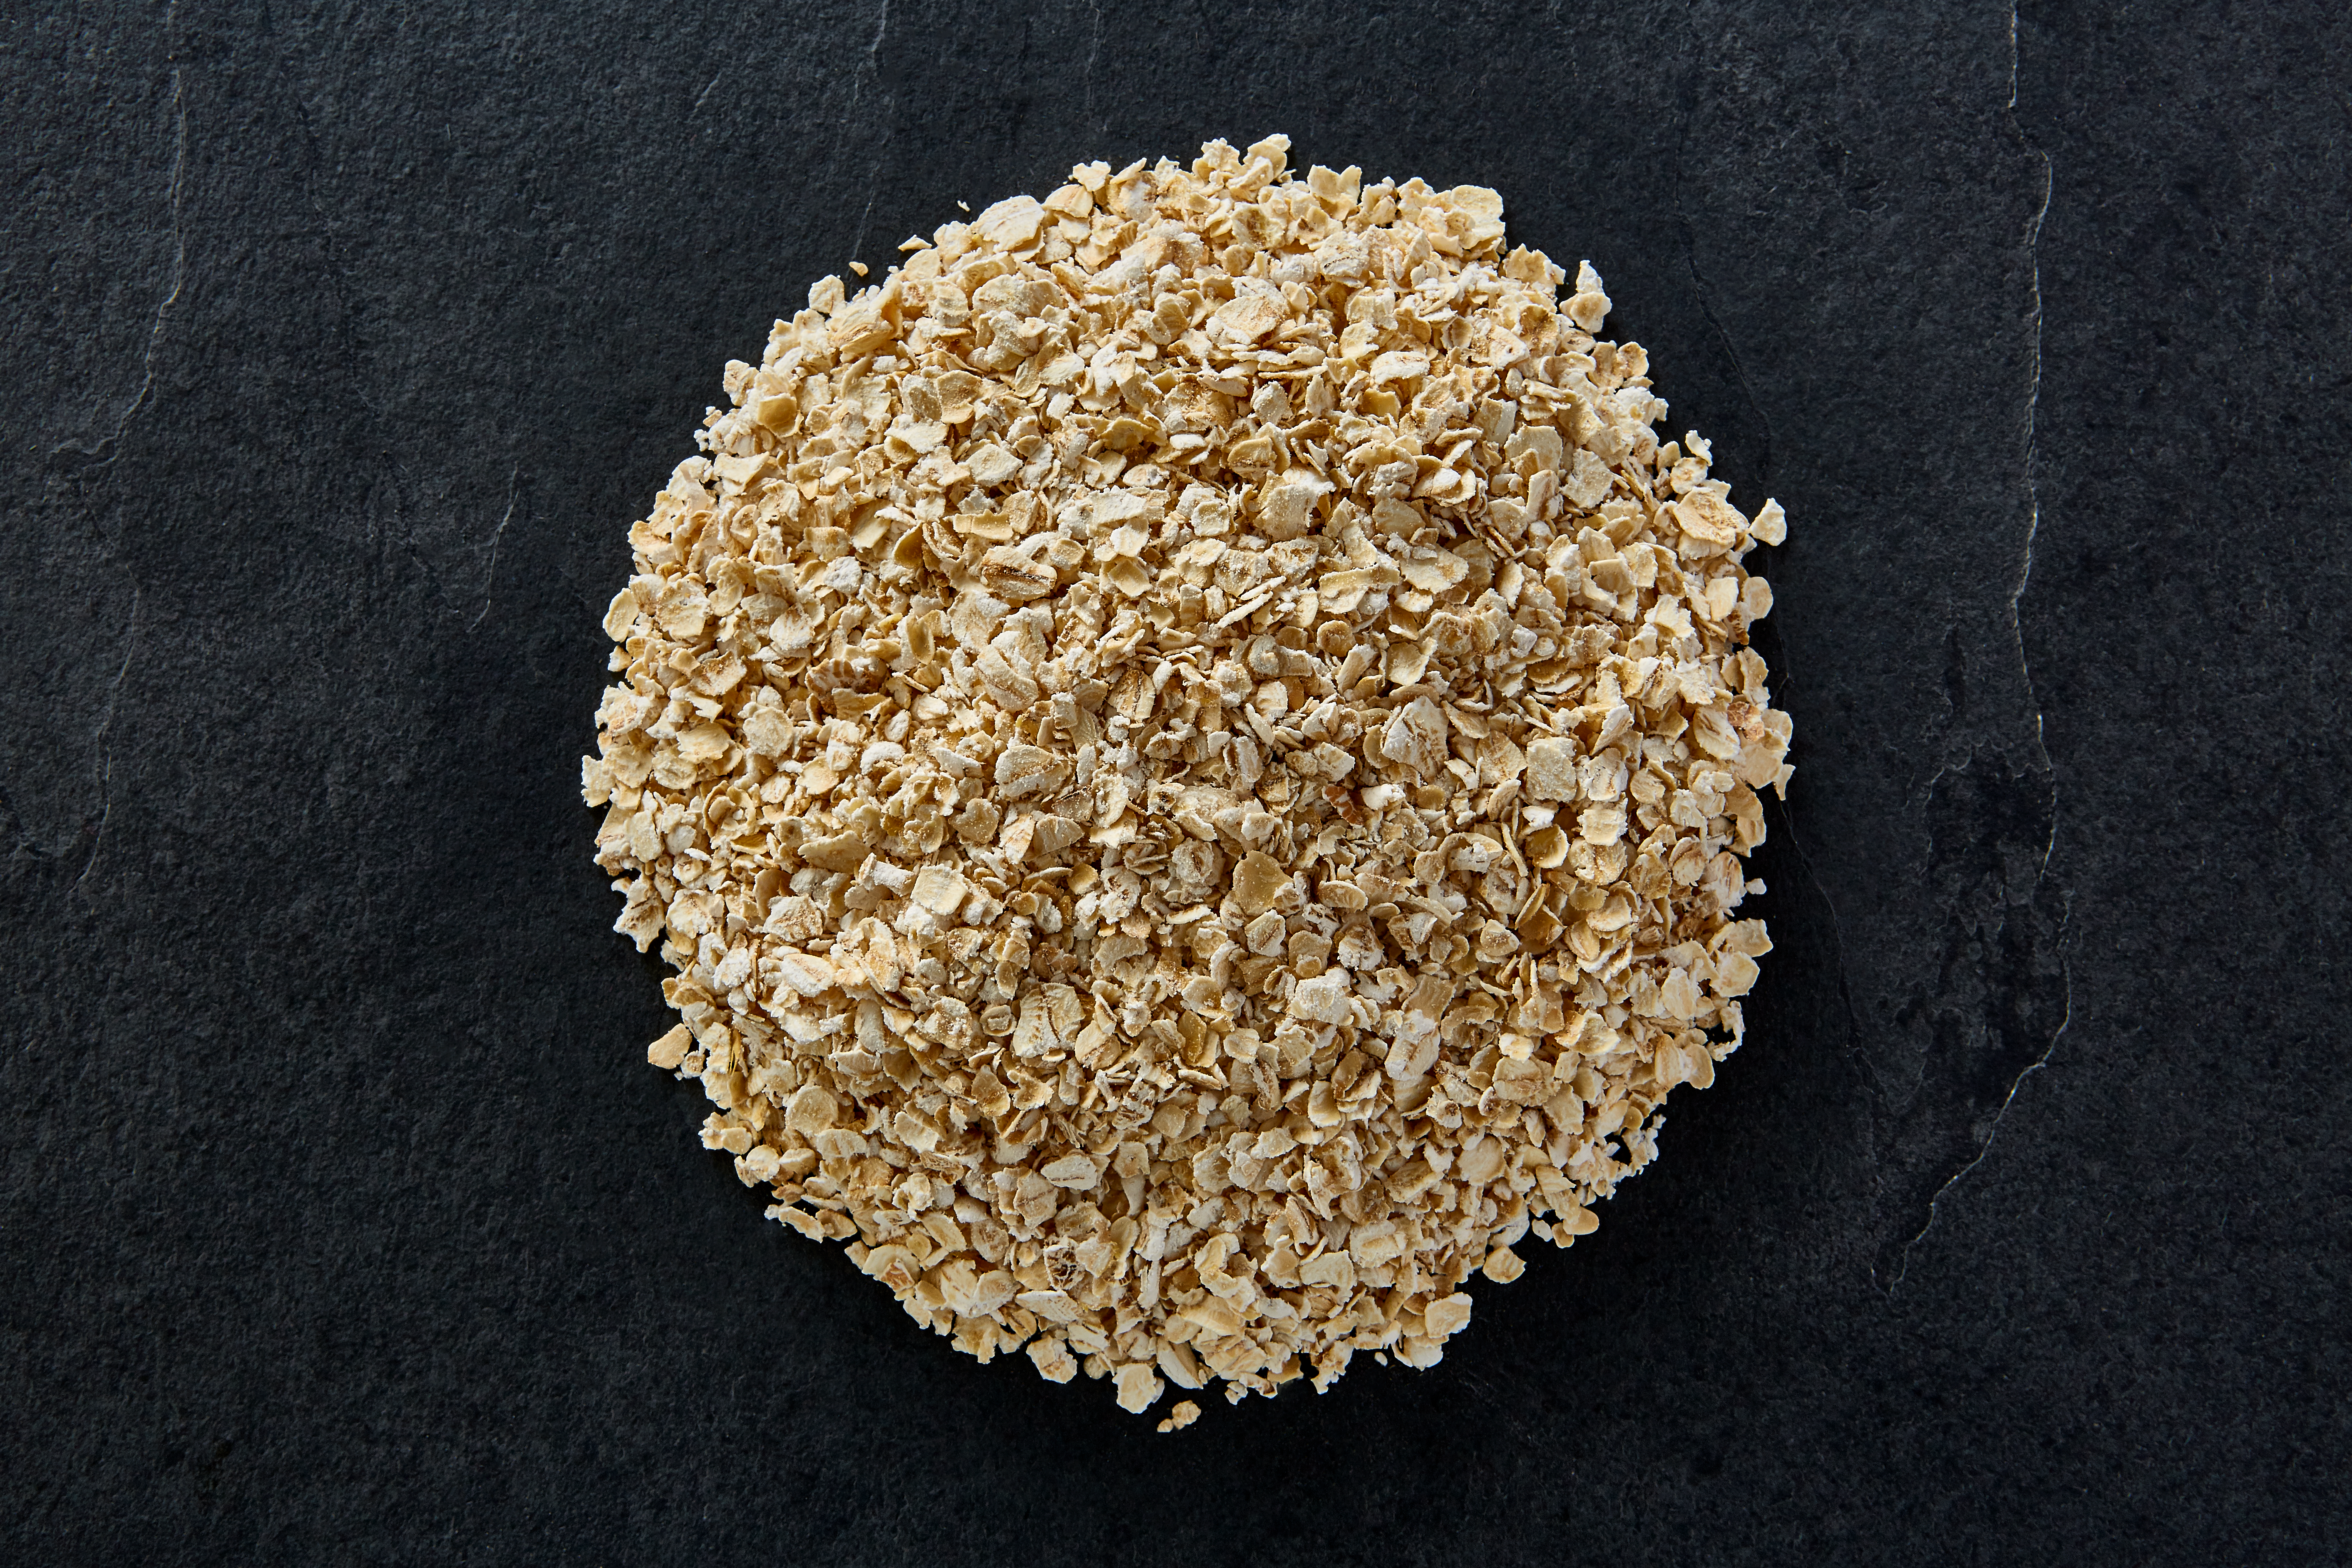 Oat flakes 24s- one of our most popular cut flakes